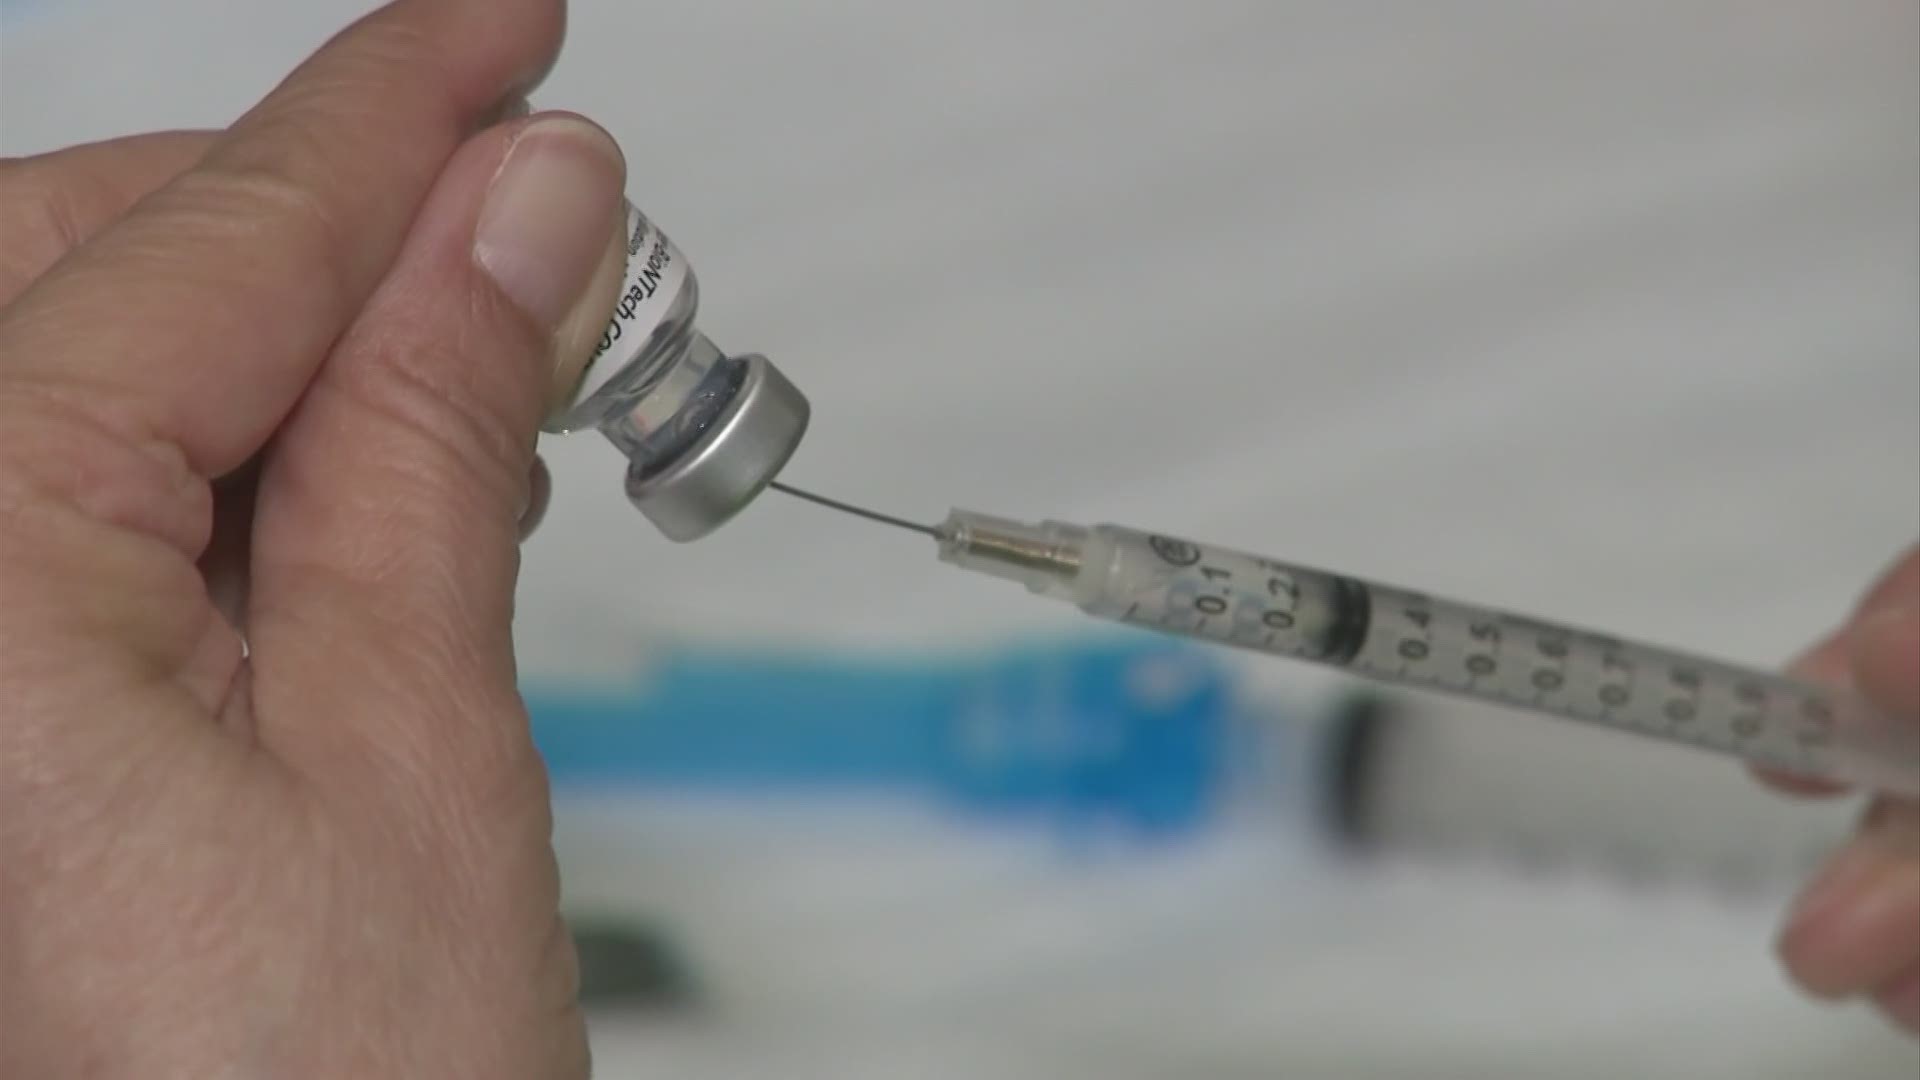 45% of Ohioans are currently vaccinated.